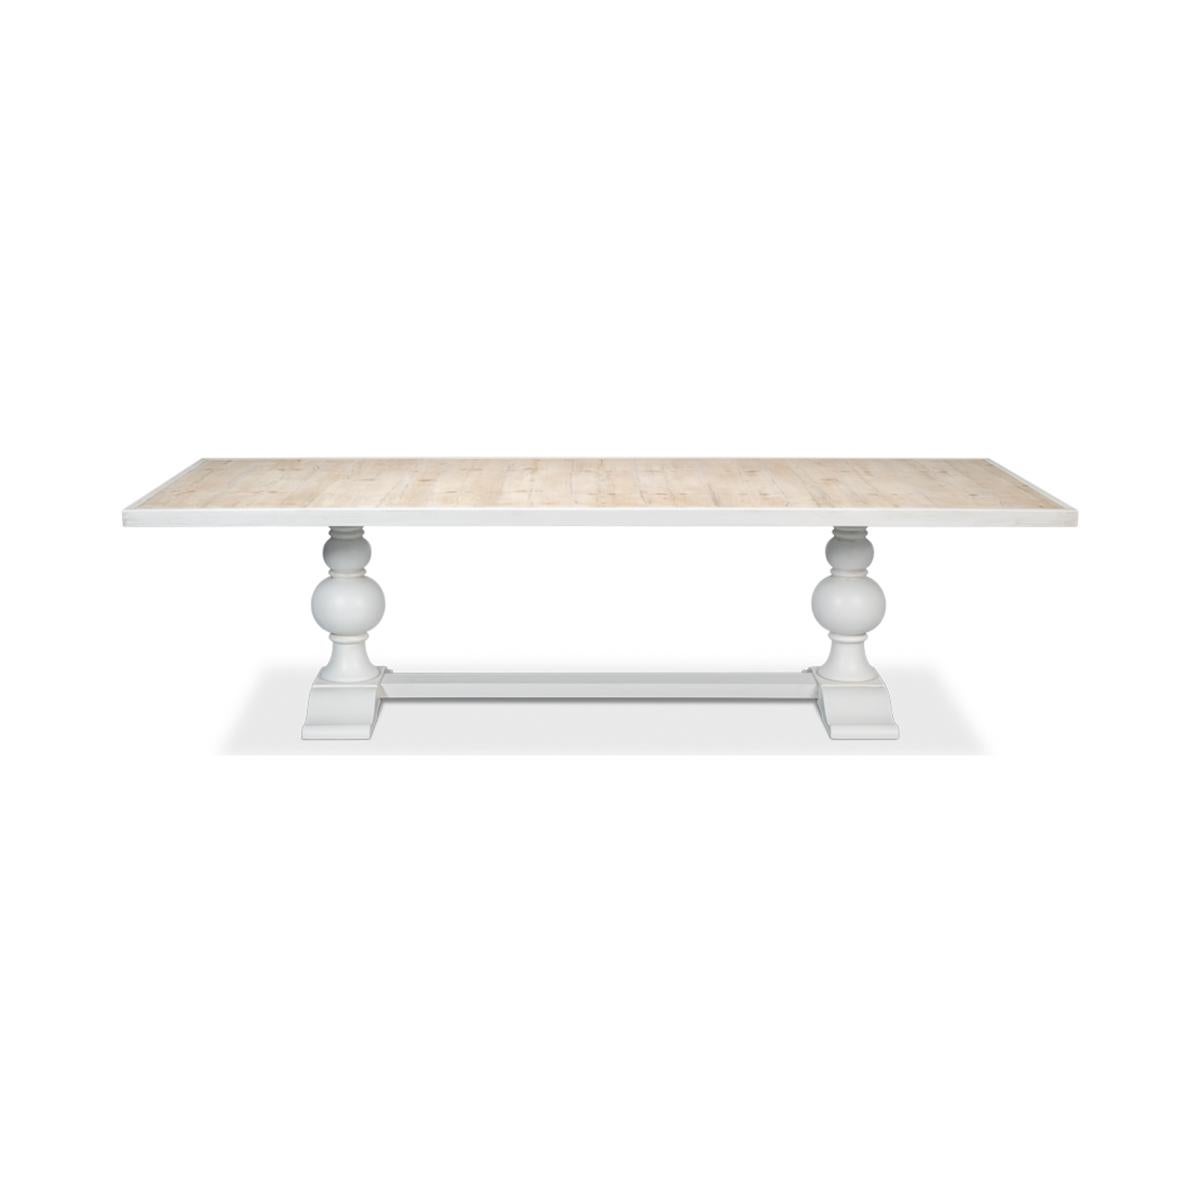 Wooden Dining Table. With an inlaid reclaimed wood top that adds finesse to your dining area. Supported by a turned baluster double pedestal base, this table marries classic charm with modern style. The white painted finish completes the look,